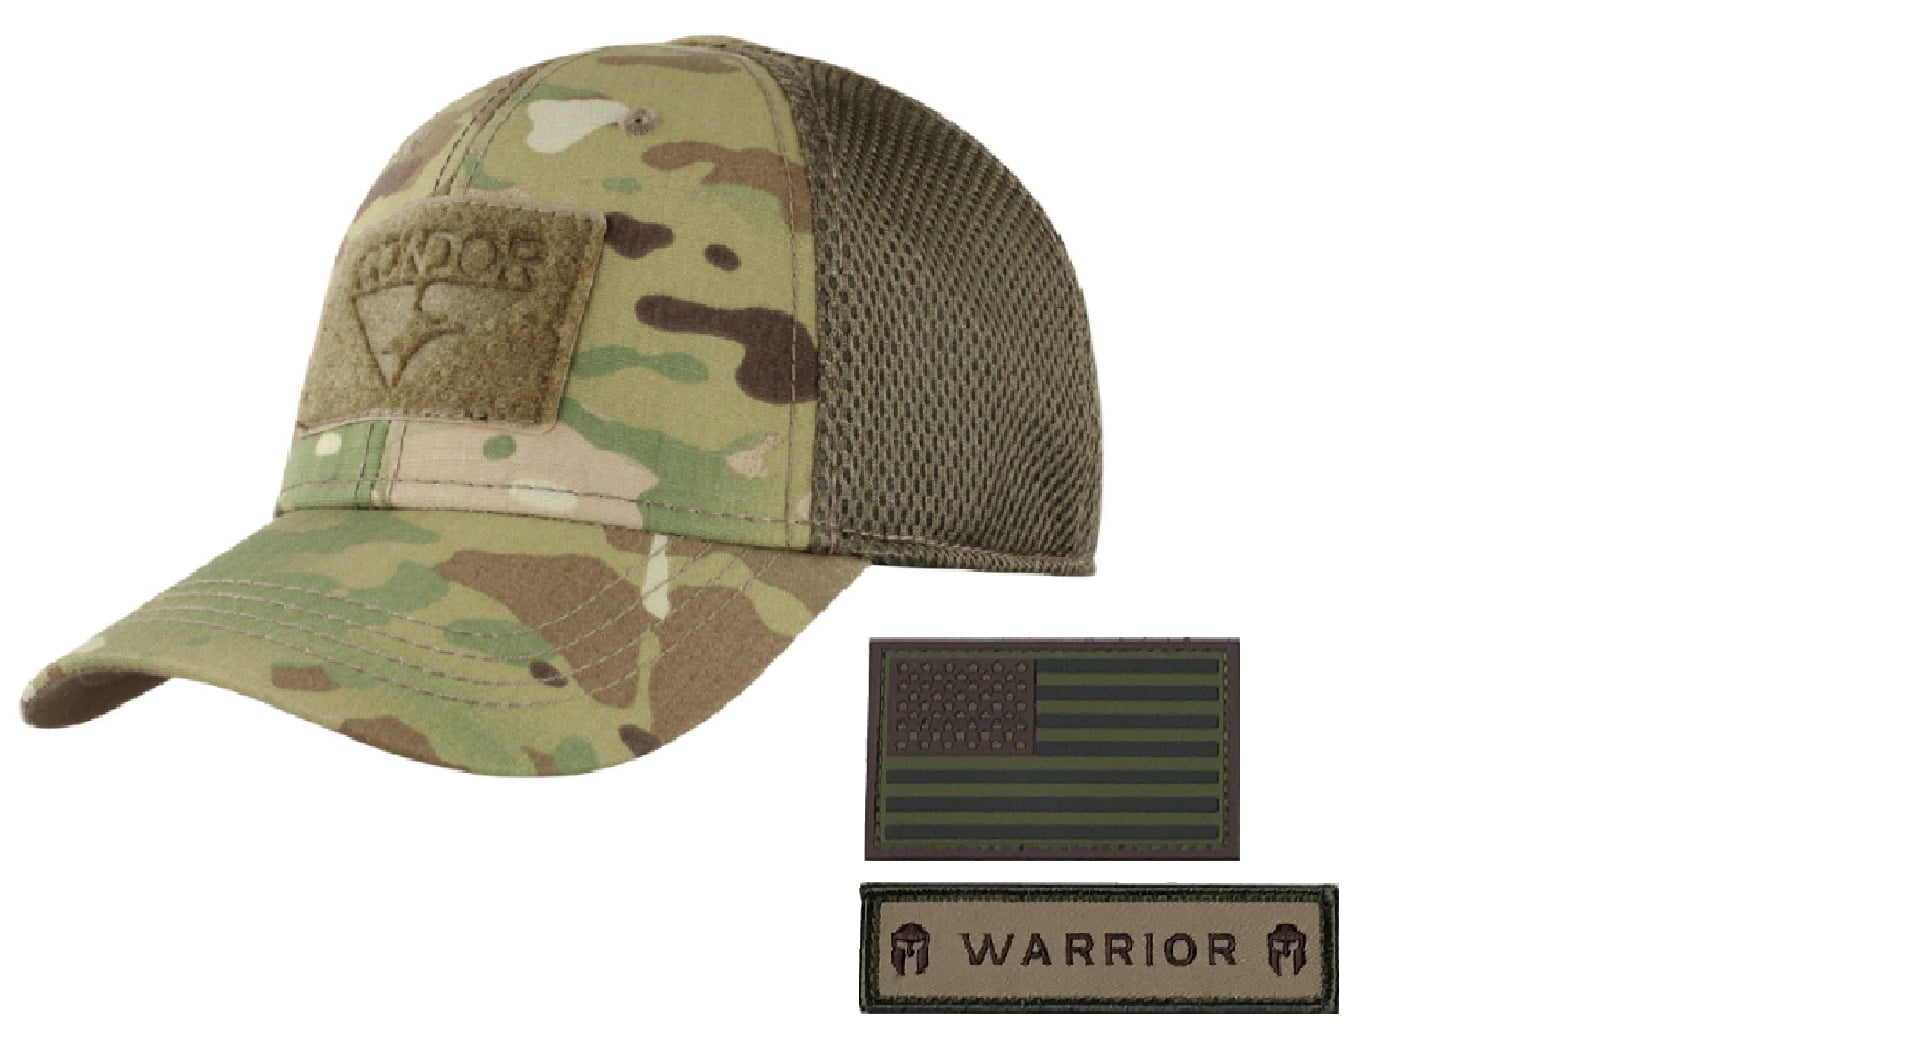 Condor Flex Tactical Cap with USA Flag Hook and Loop Patch Large/Extra Large, Graphite Foliage/Black 